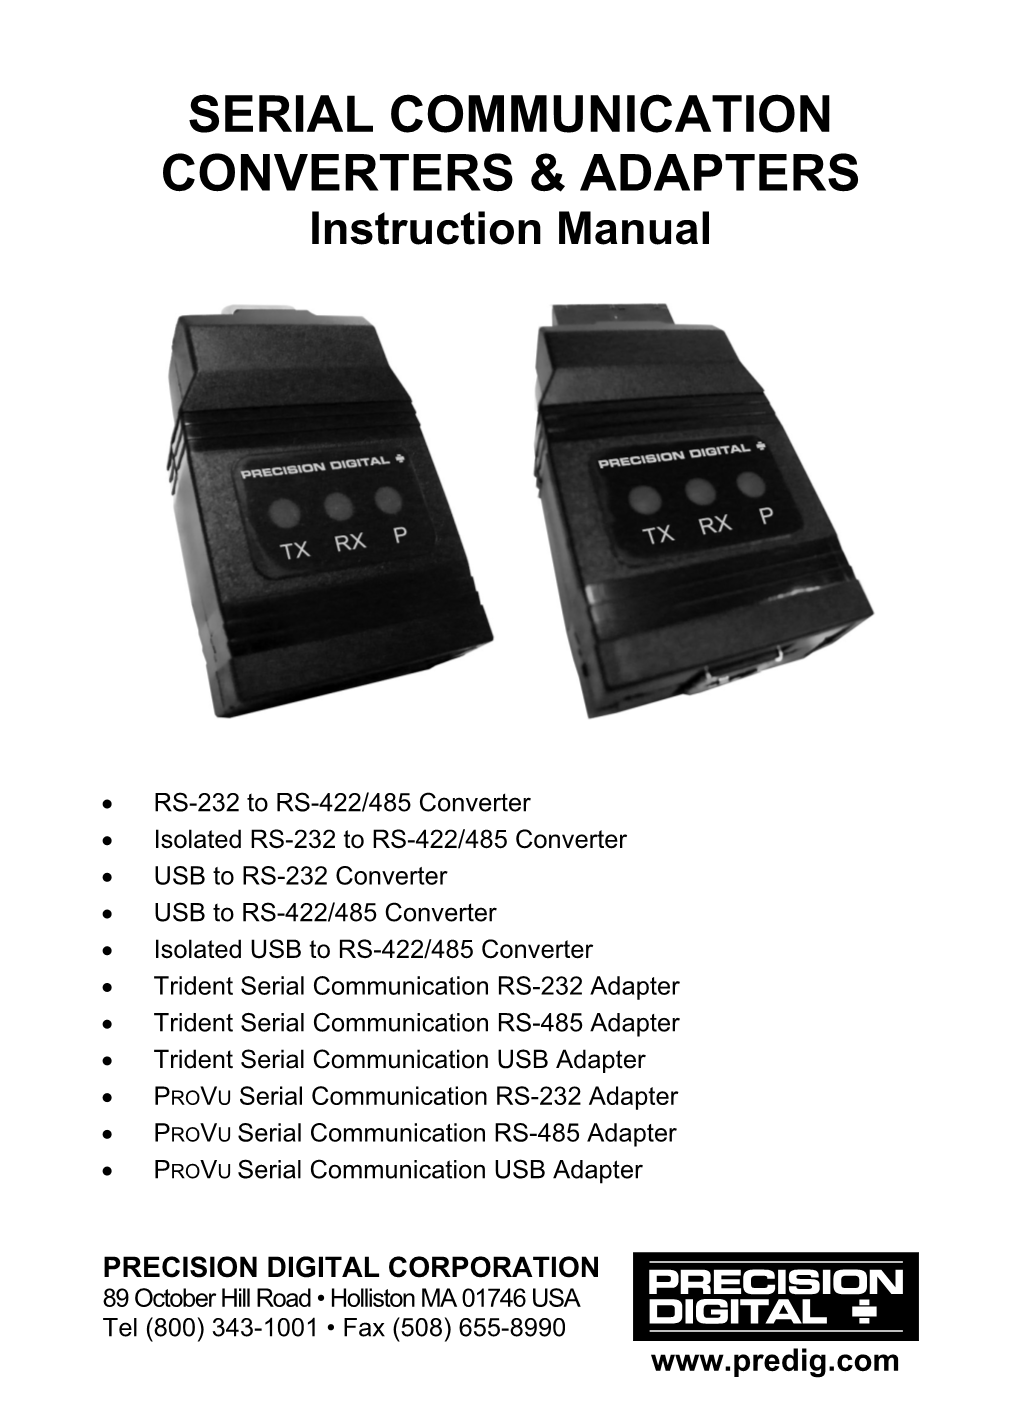 Serial Communication Converters & Adapters